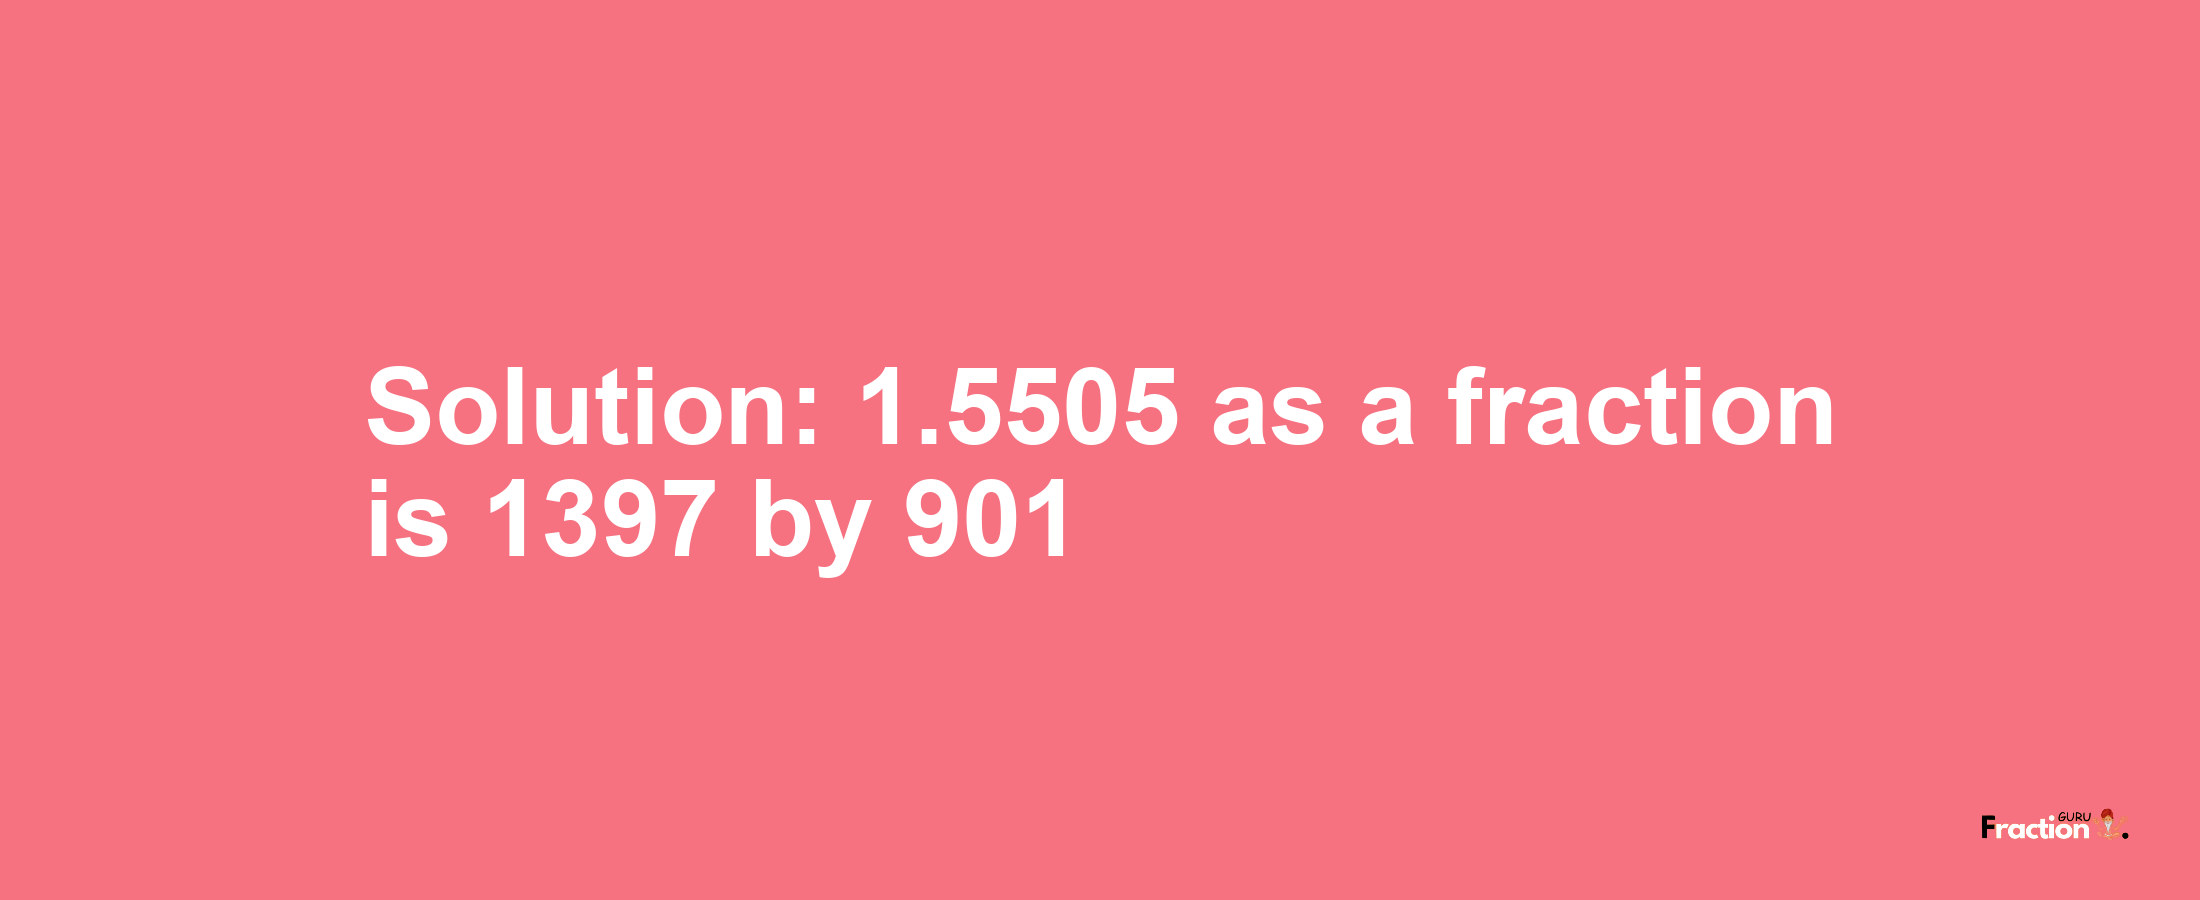 Solution:1.5505 as a fraction is 1397/901